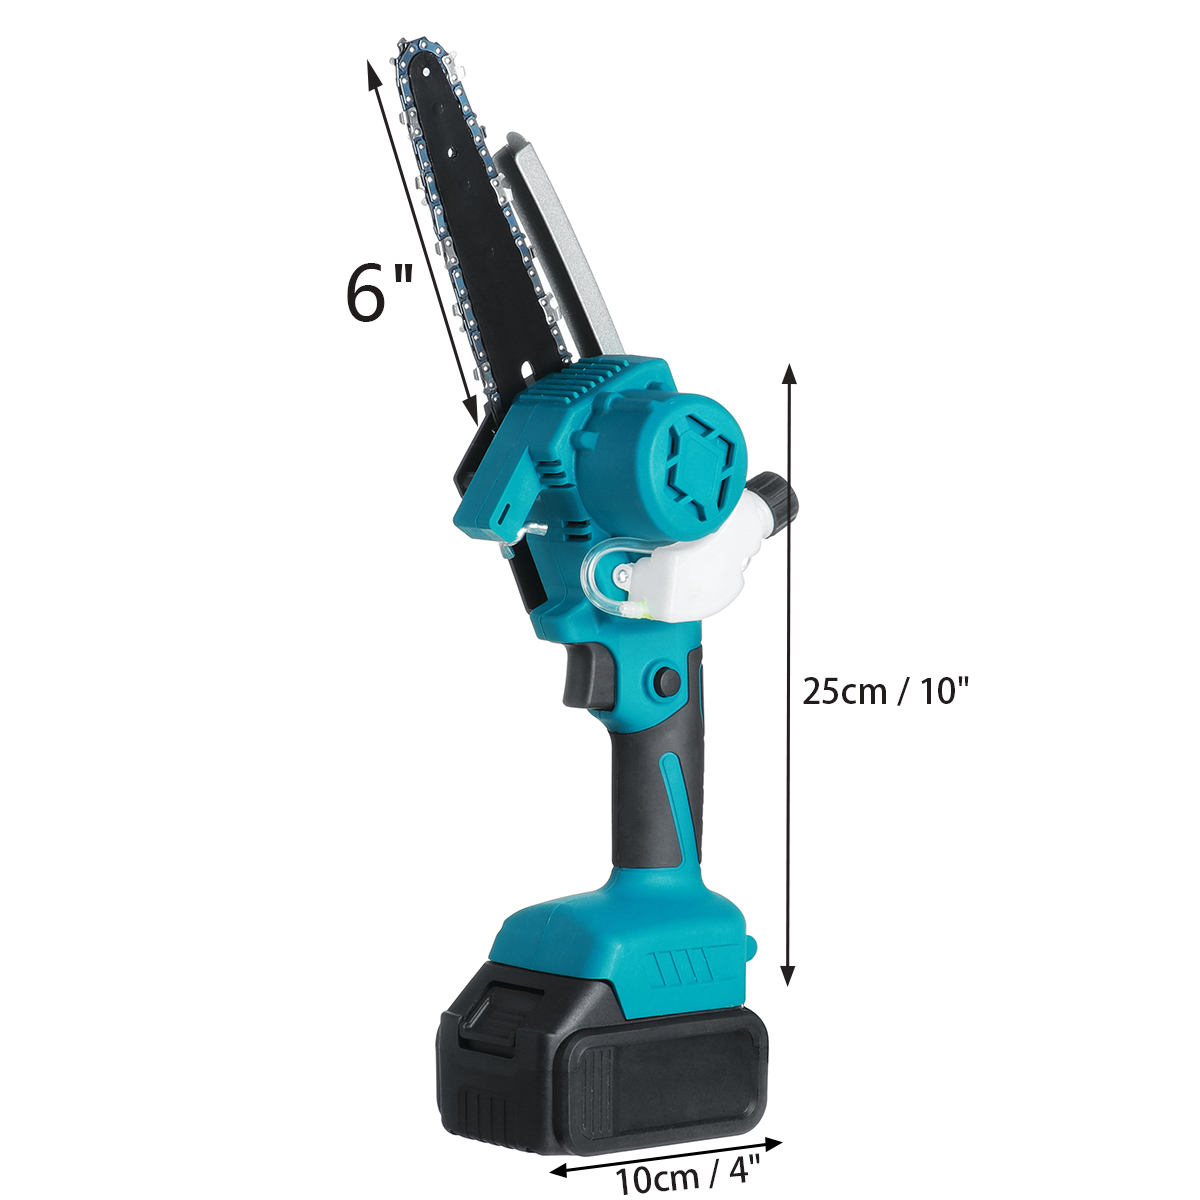 6Inch-Brushless-Rechargable-Mini-Chainsaw-Portable-Cordless-Electric-Chain-Saws-W-Battery-Adapted-To-1835157-11